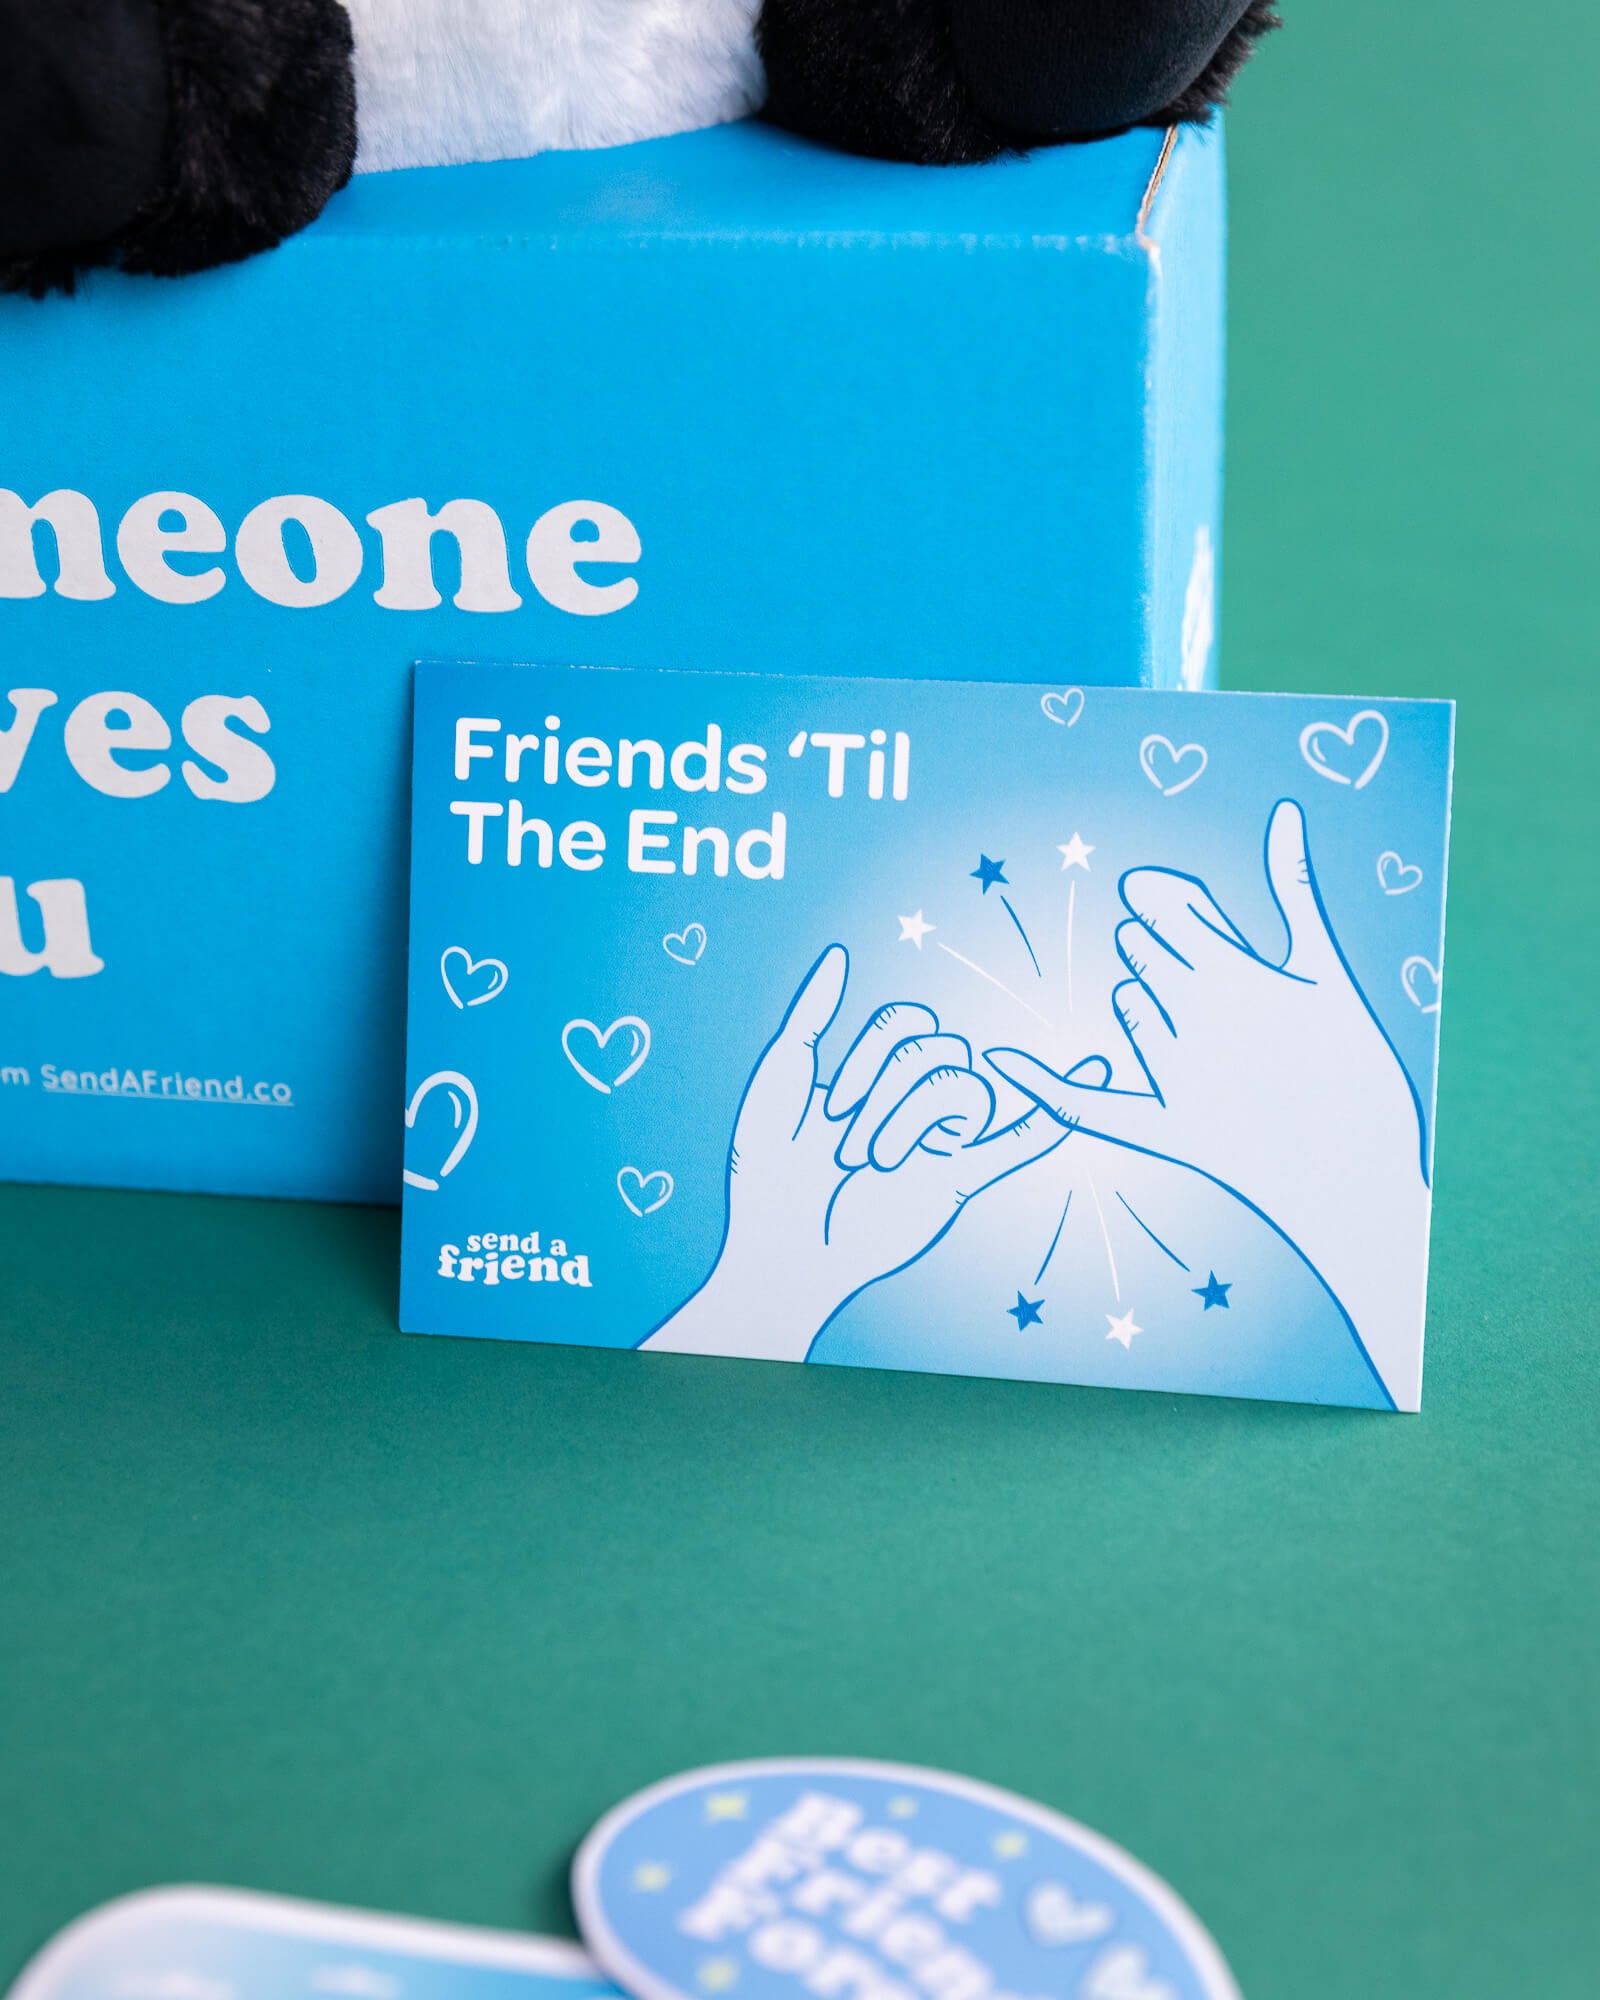 Photo of promotional card included in Friends Forever Bundle. Card reads: "Friends 'Til The End"